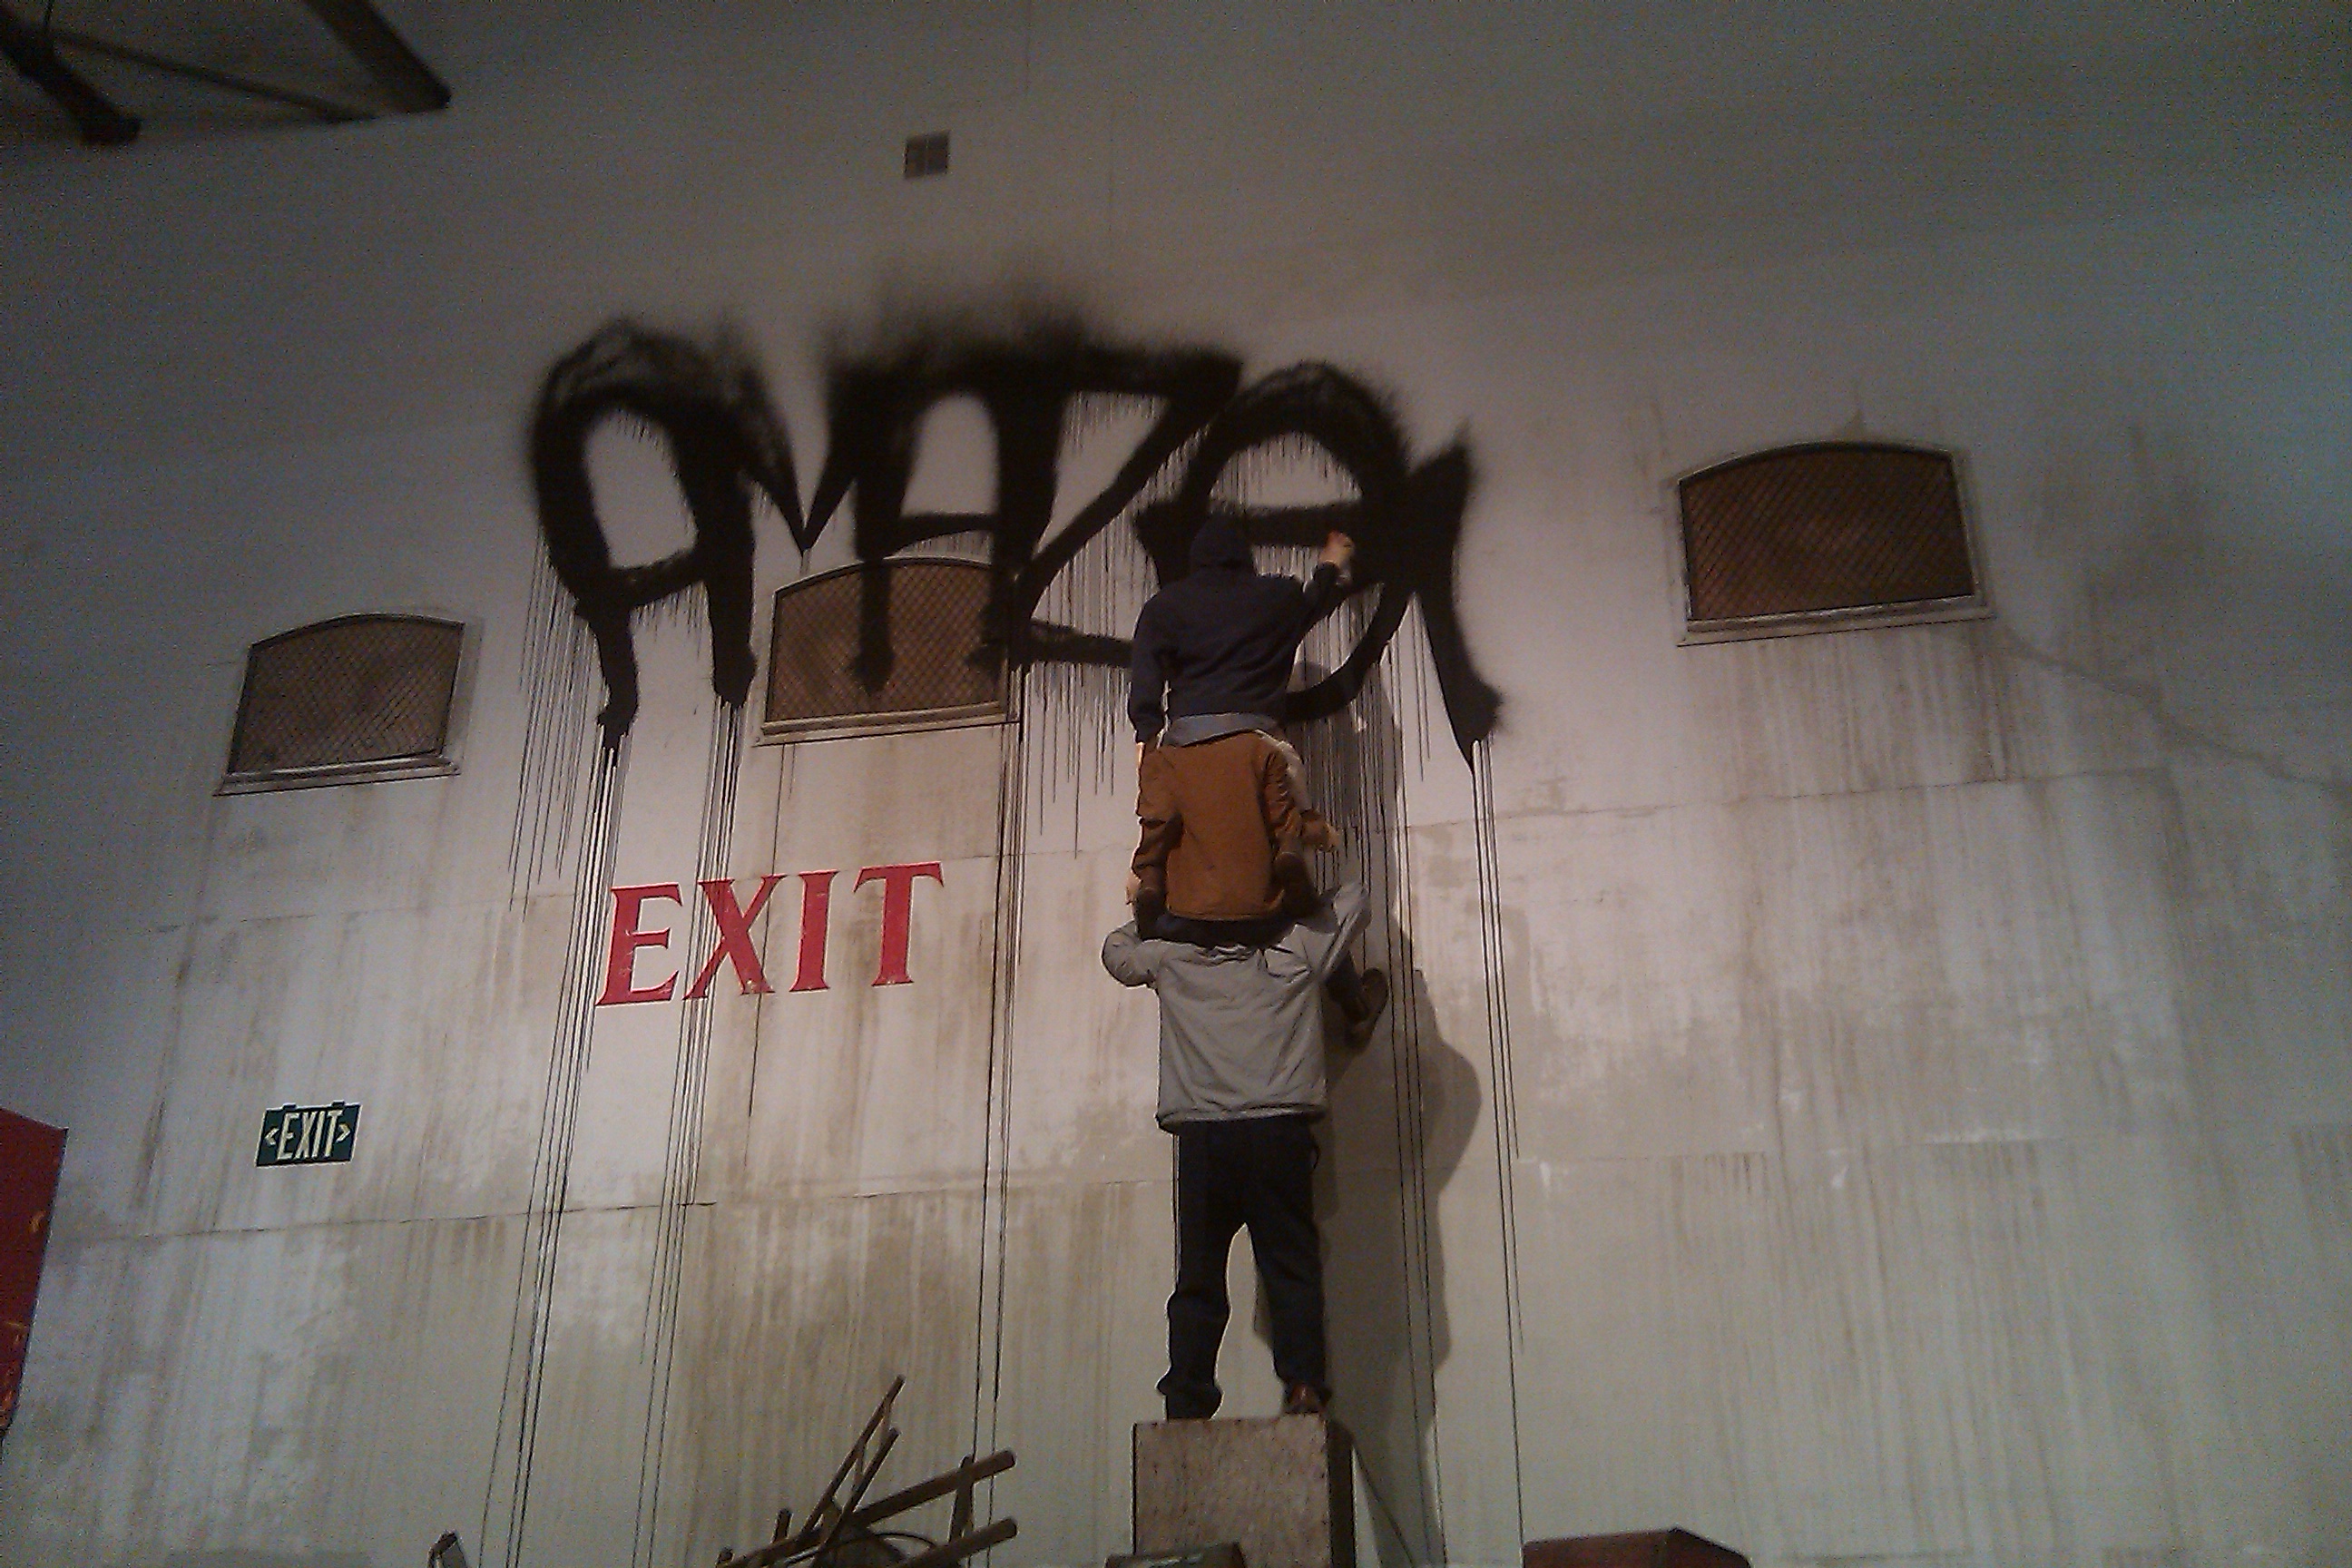 museum of contemporary art, los angeles - Exit